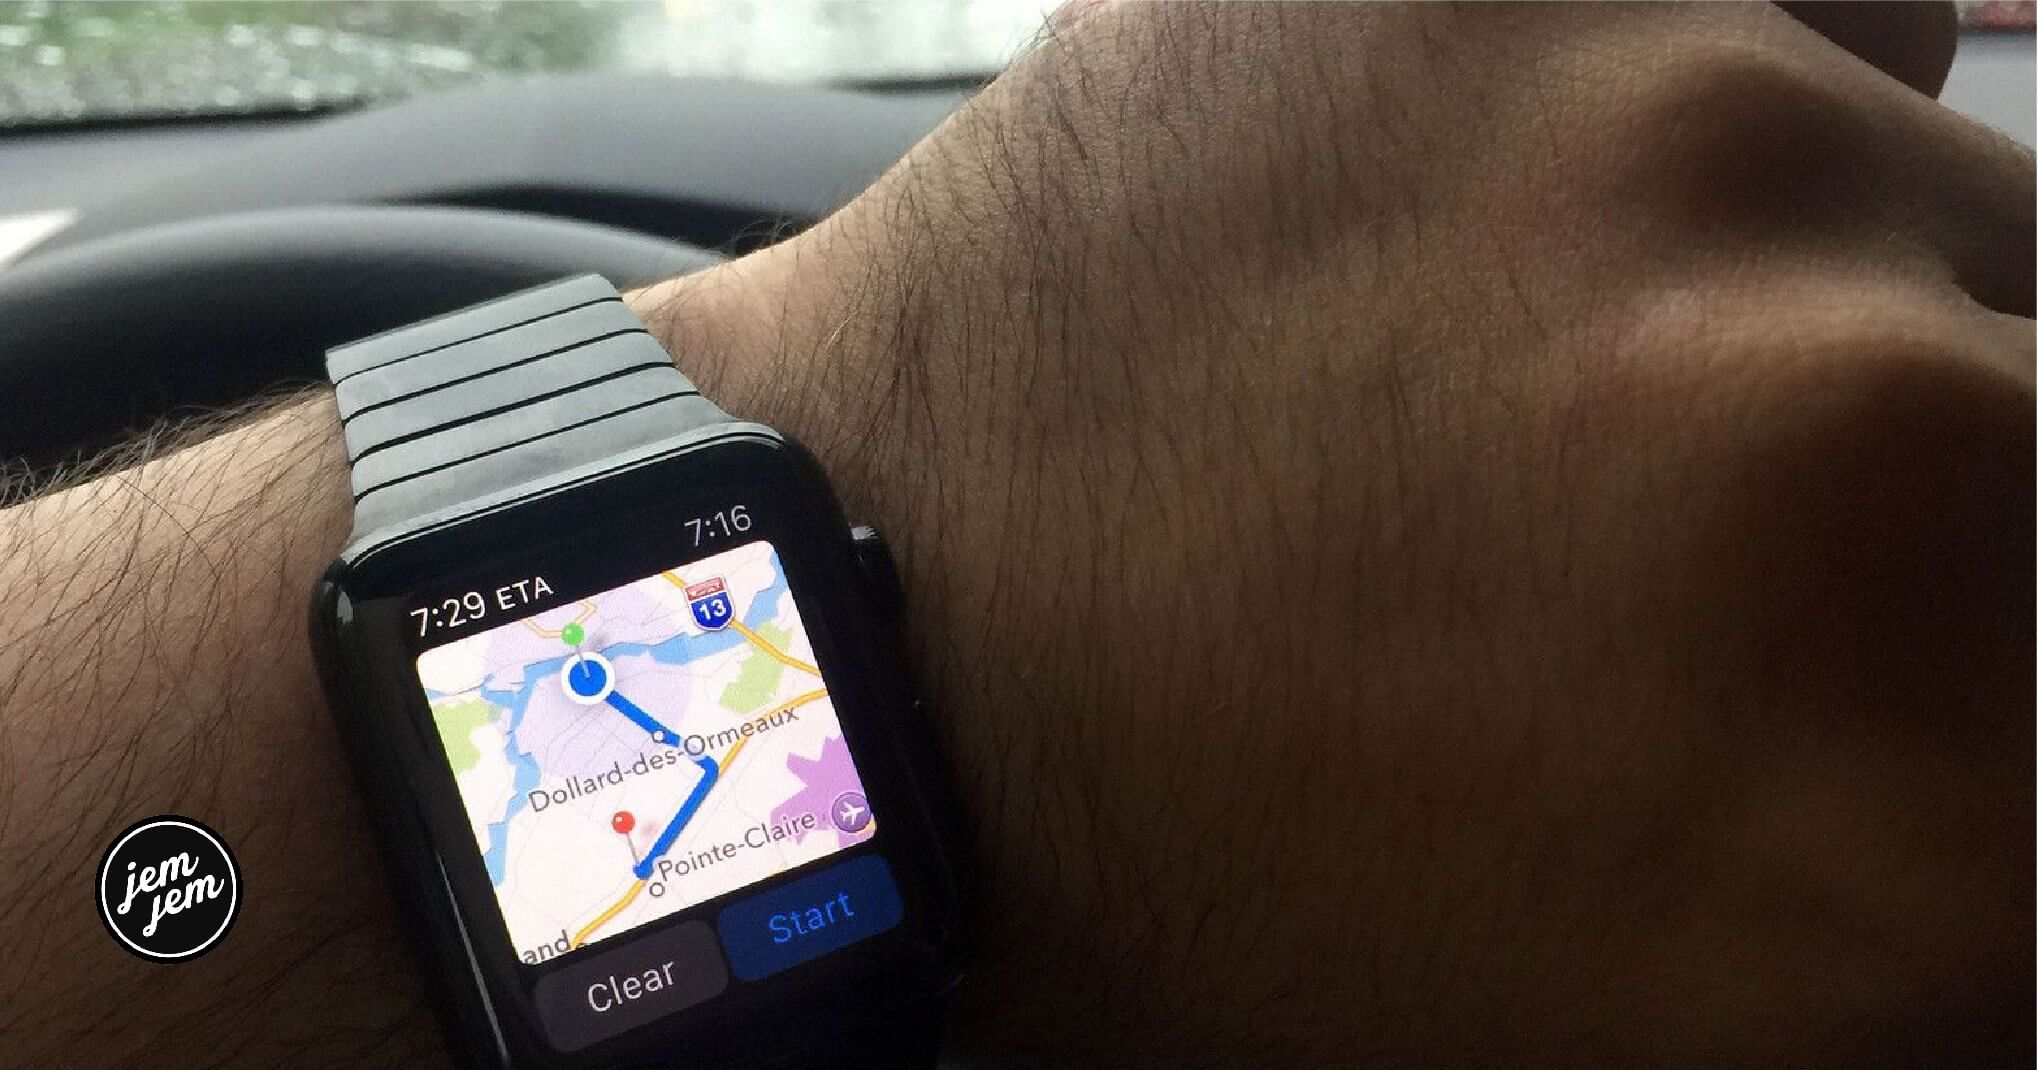 How to check maps and directions on your Apple Watch